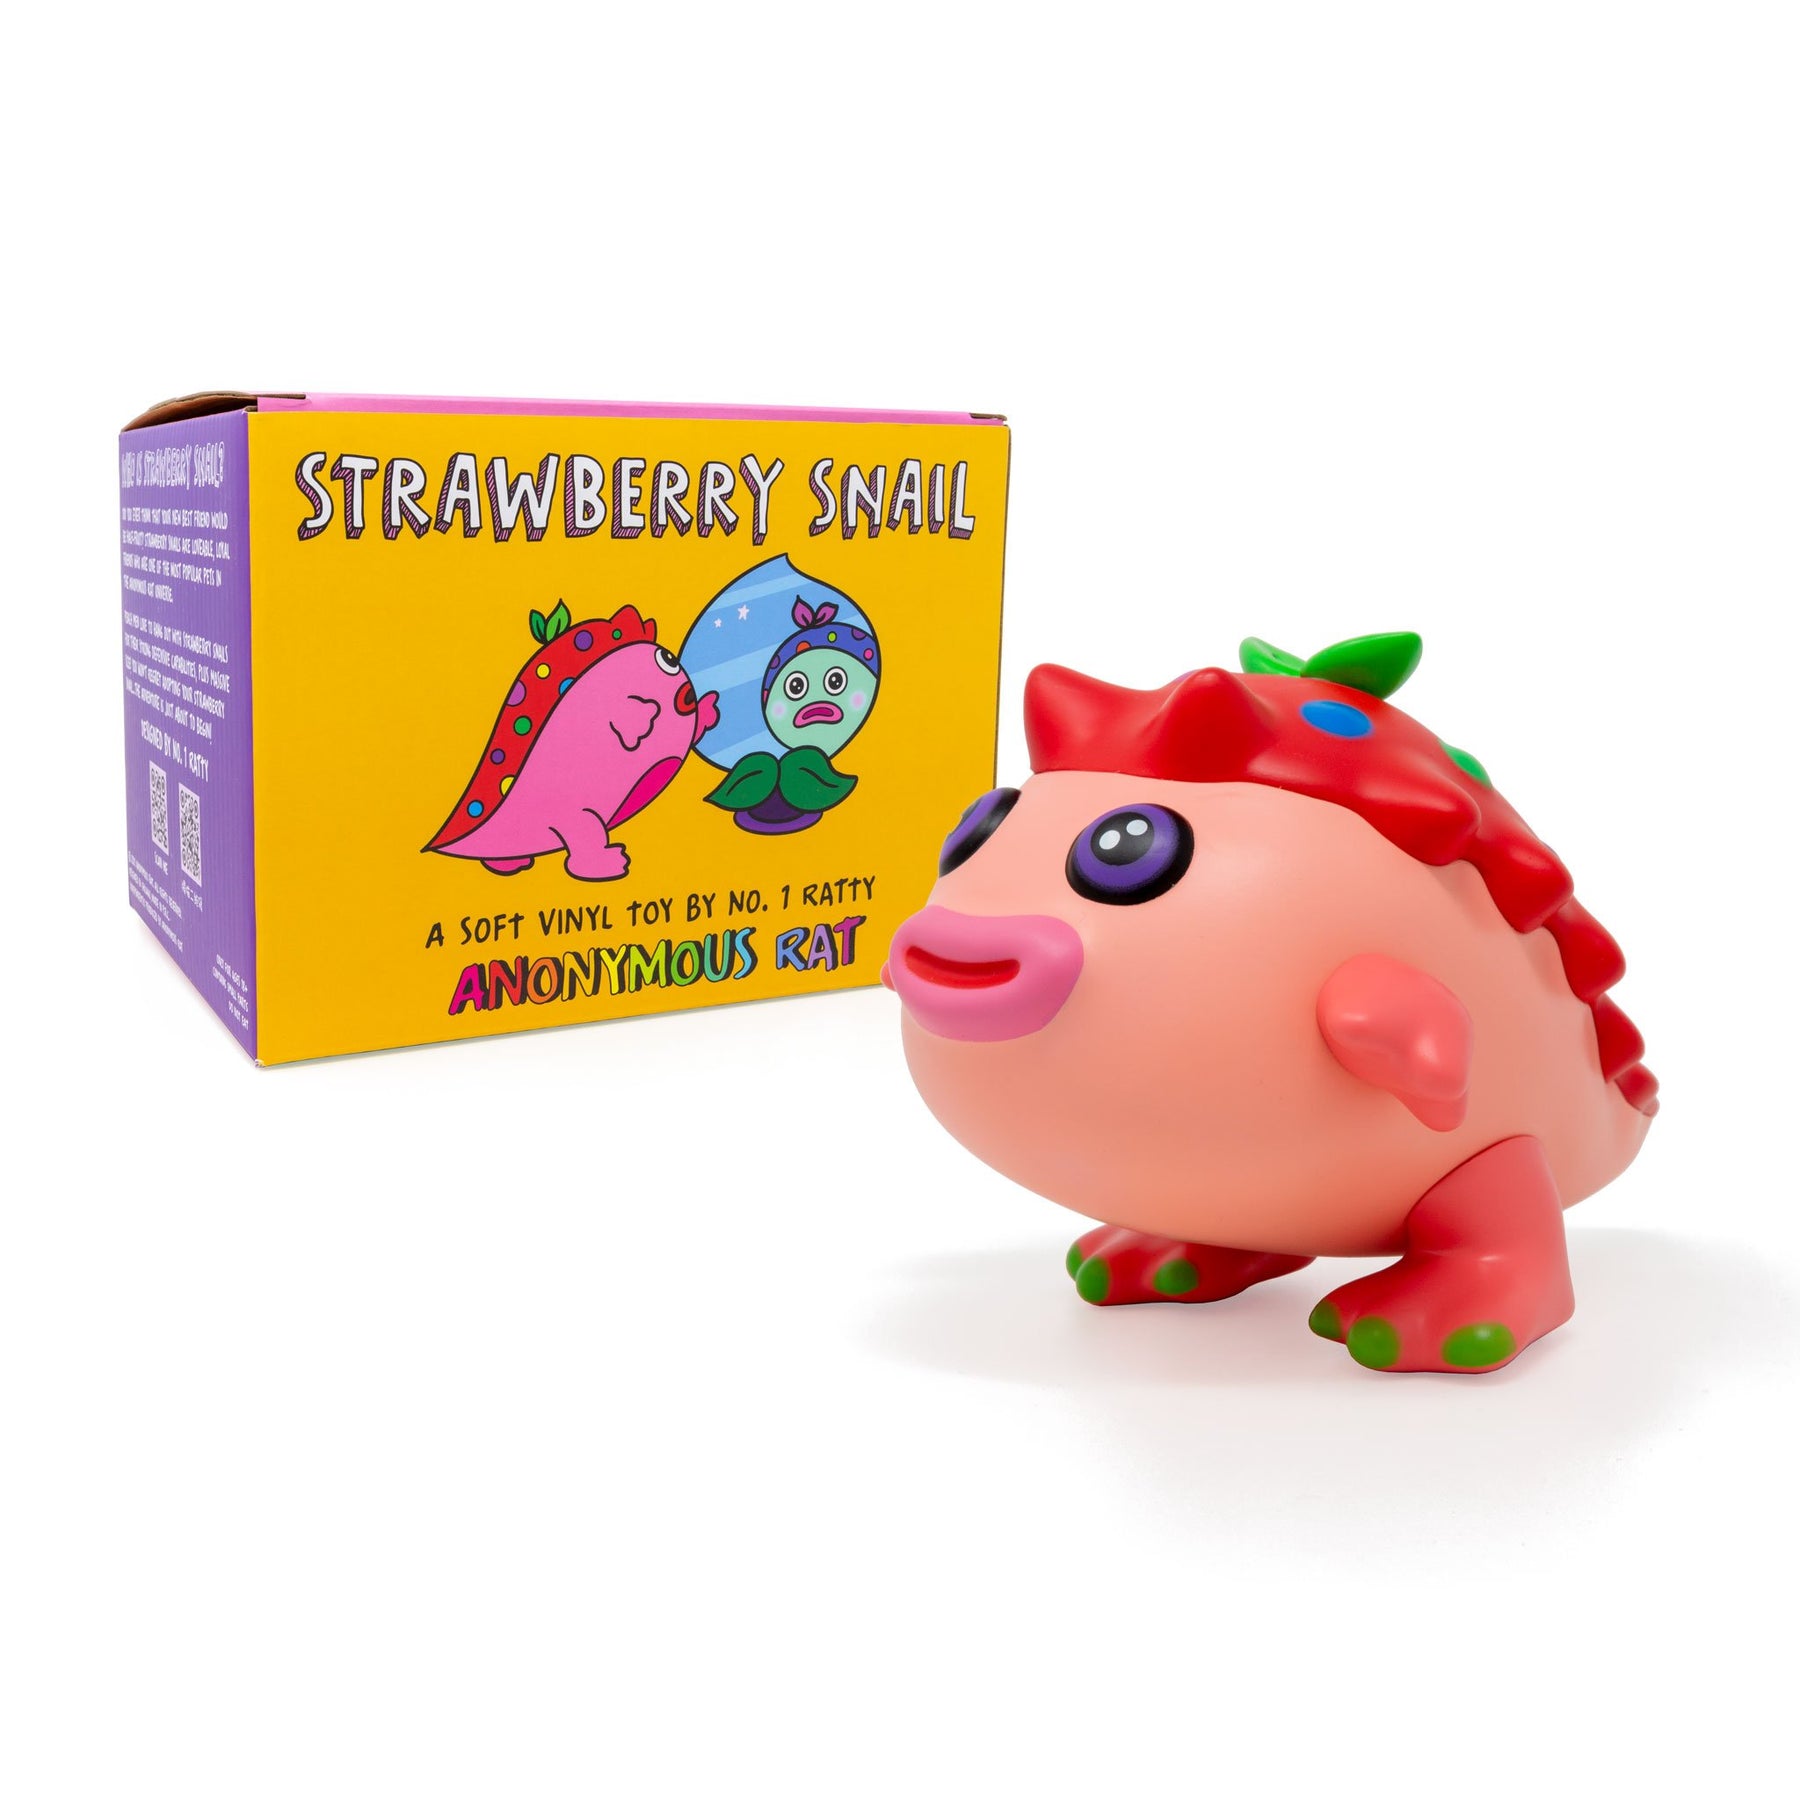 Strawberry Snail 4-inch soft vinyl toy by Anonymous Rat Available Now